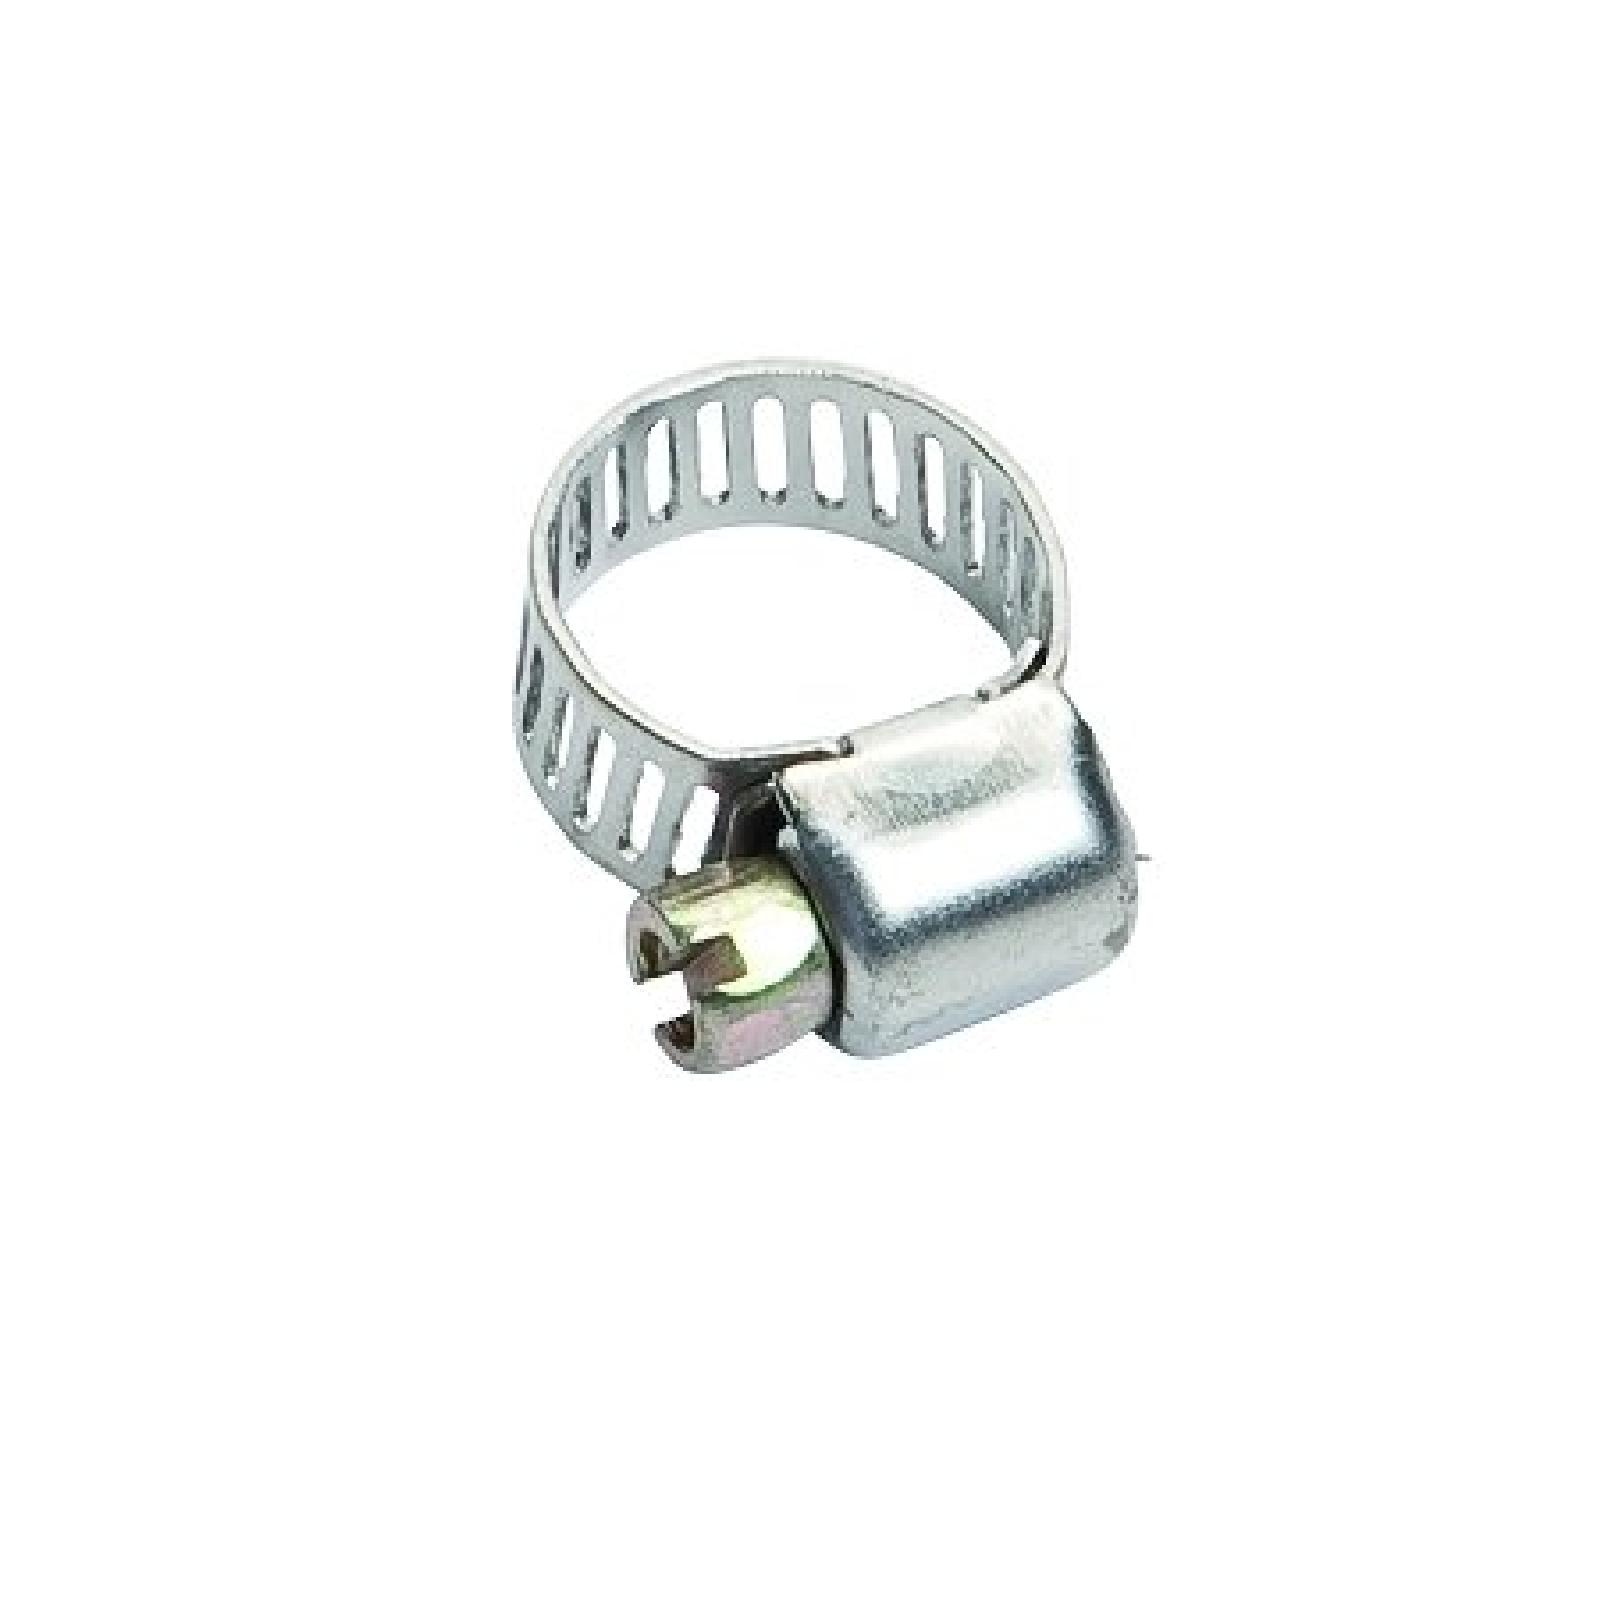 HOSE CLAMP 7/32 5/8IN part# 02-700 by Oregon